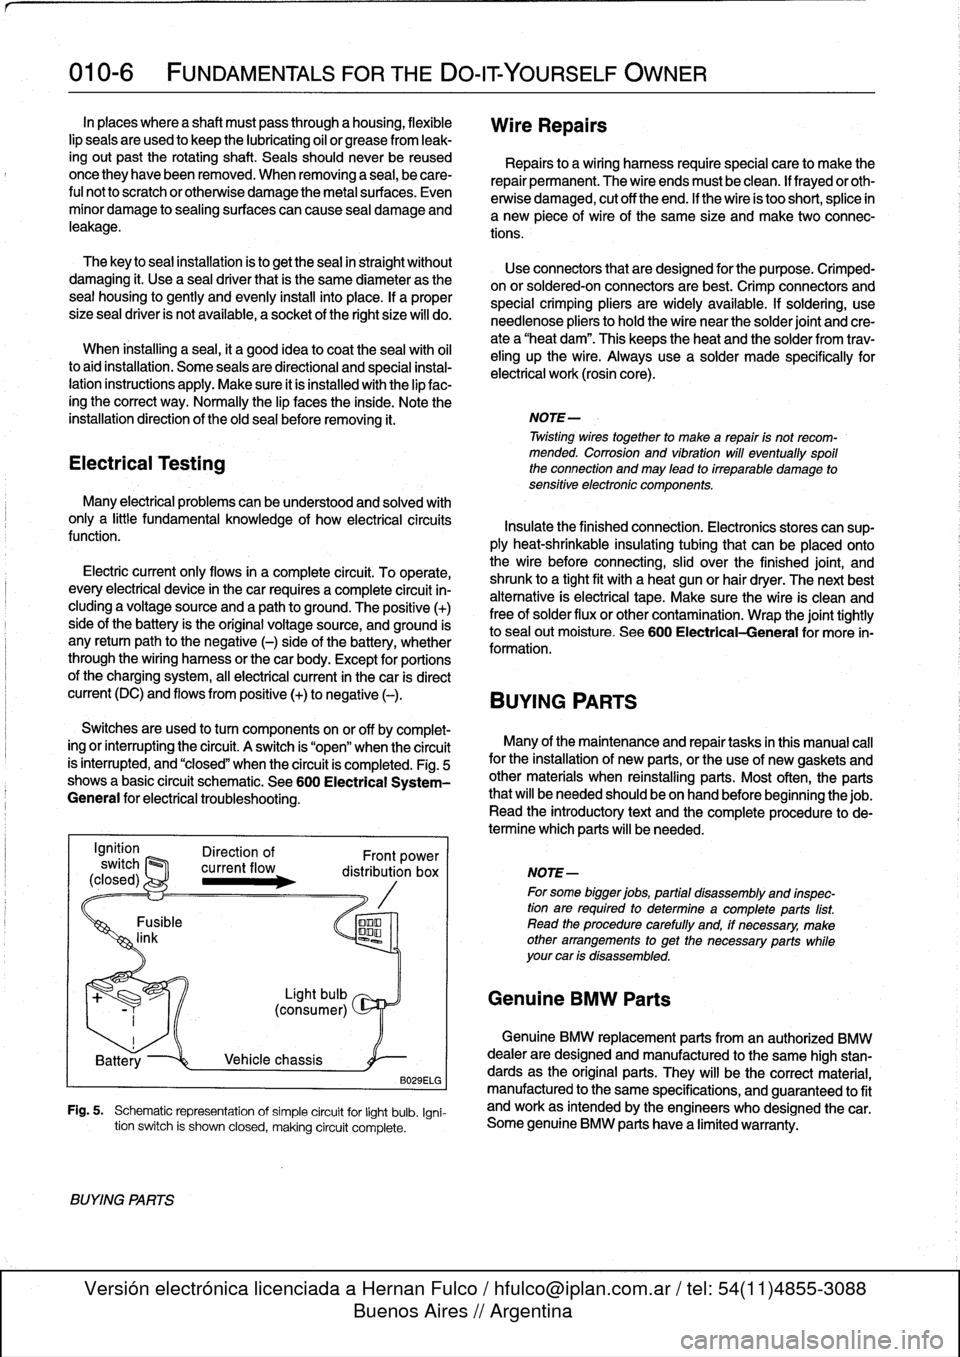 BMW 328i 1995 E36 Workshop Manual 
010-
6

	

FUNDAMENTALS
FOR
THE
DO-ITYOURSELF
OWNER

In
places
where
a
shaft
mustpass
through
a
housing,
flexible
lip
seals
areused
to
keep
the
lubricating
oil
or
grease
from
leak-

ingout
past
the
r